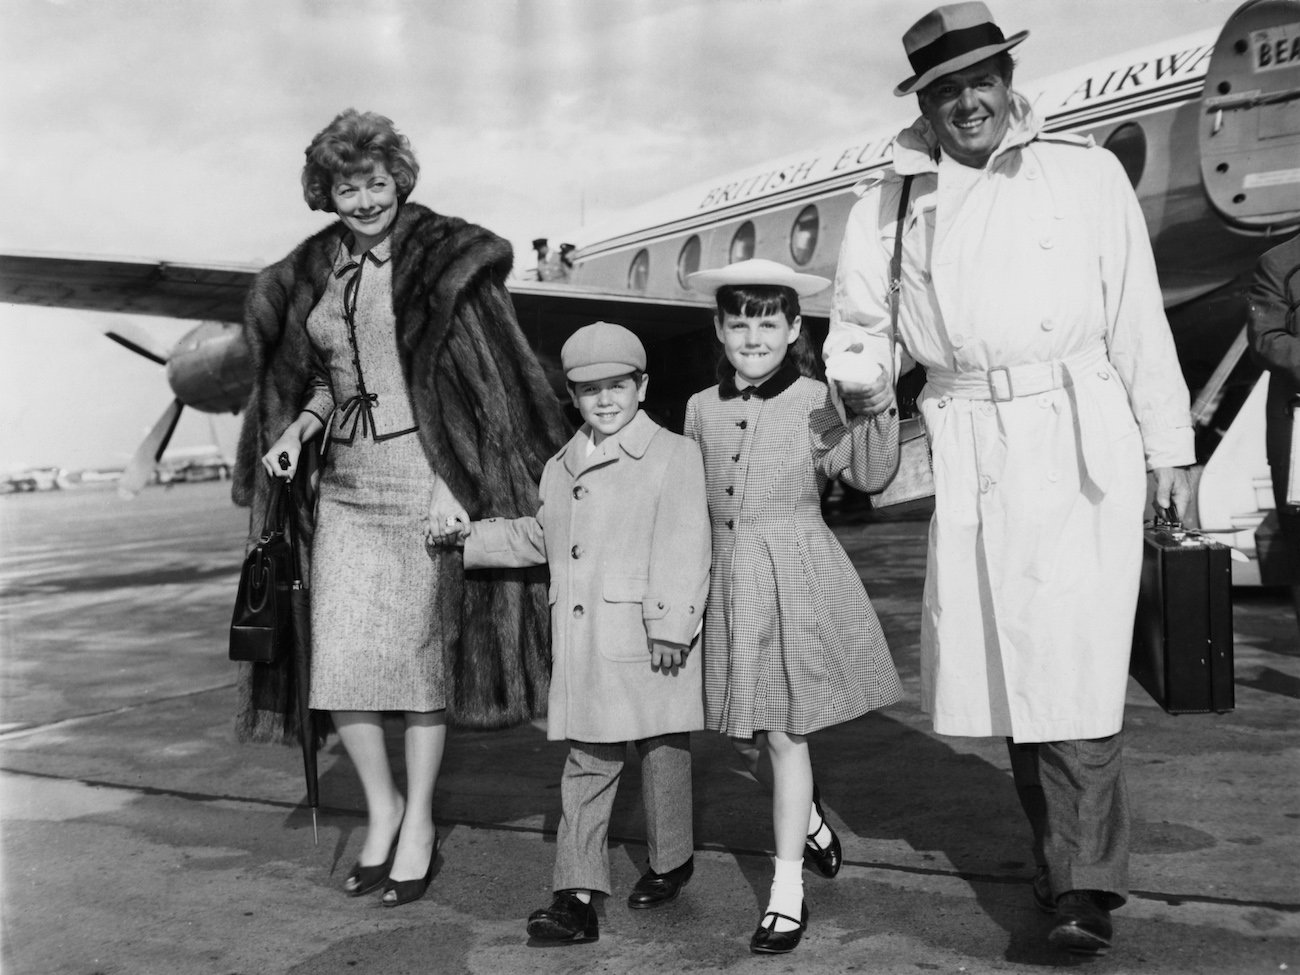 Lucille Ball and her husband, Desi Arnaz, hold hands with their children as they arrive at the airport in 1959